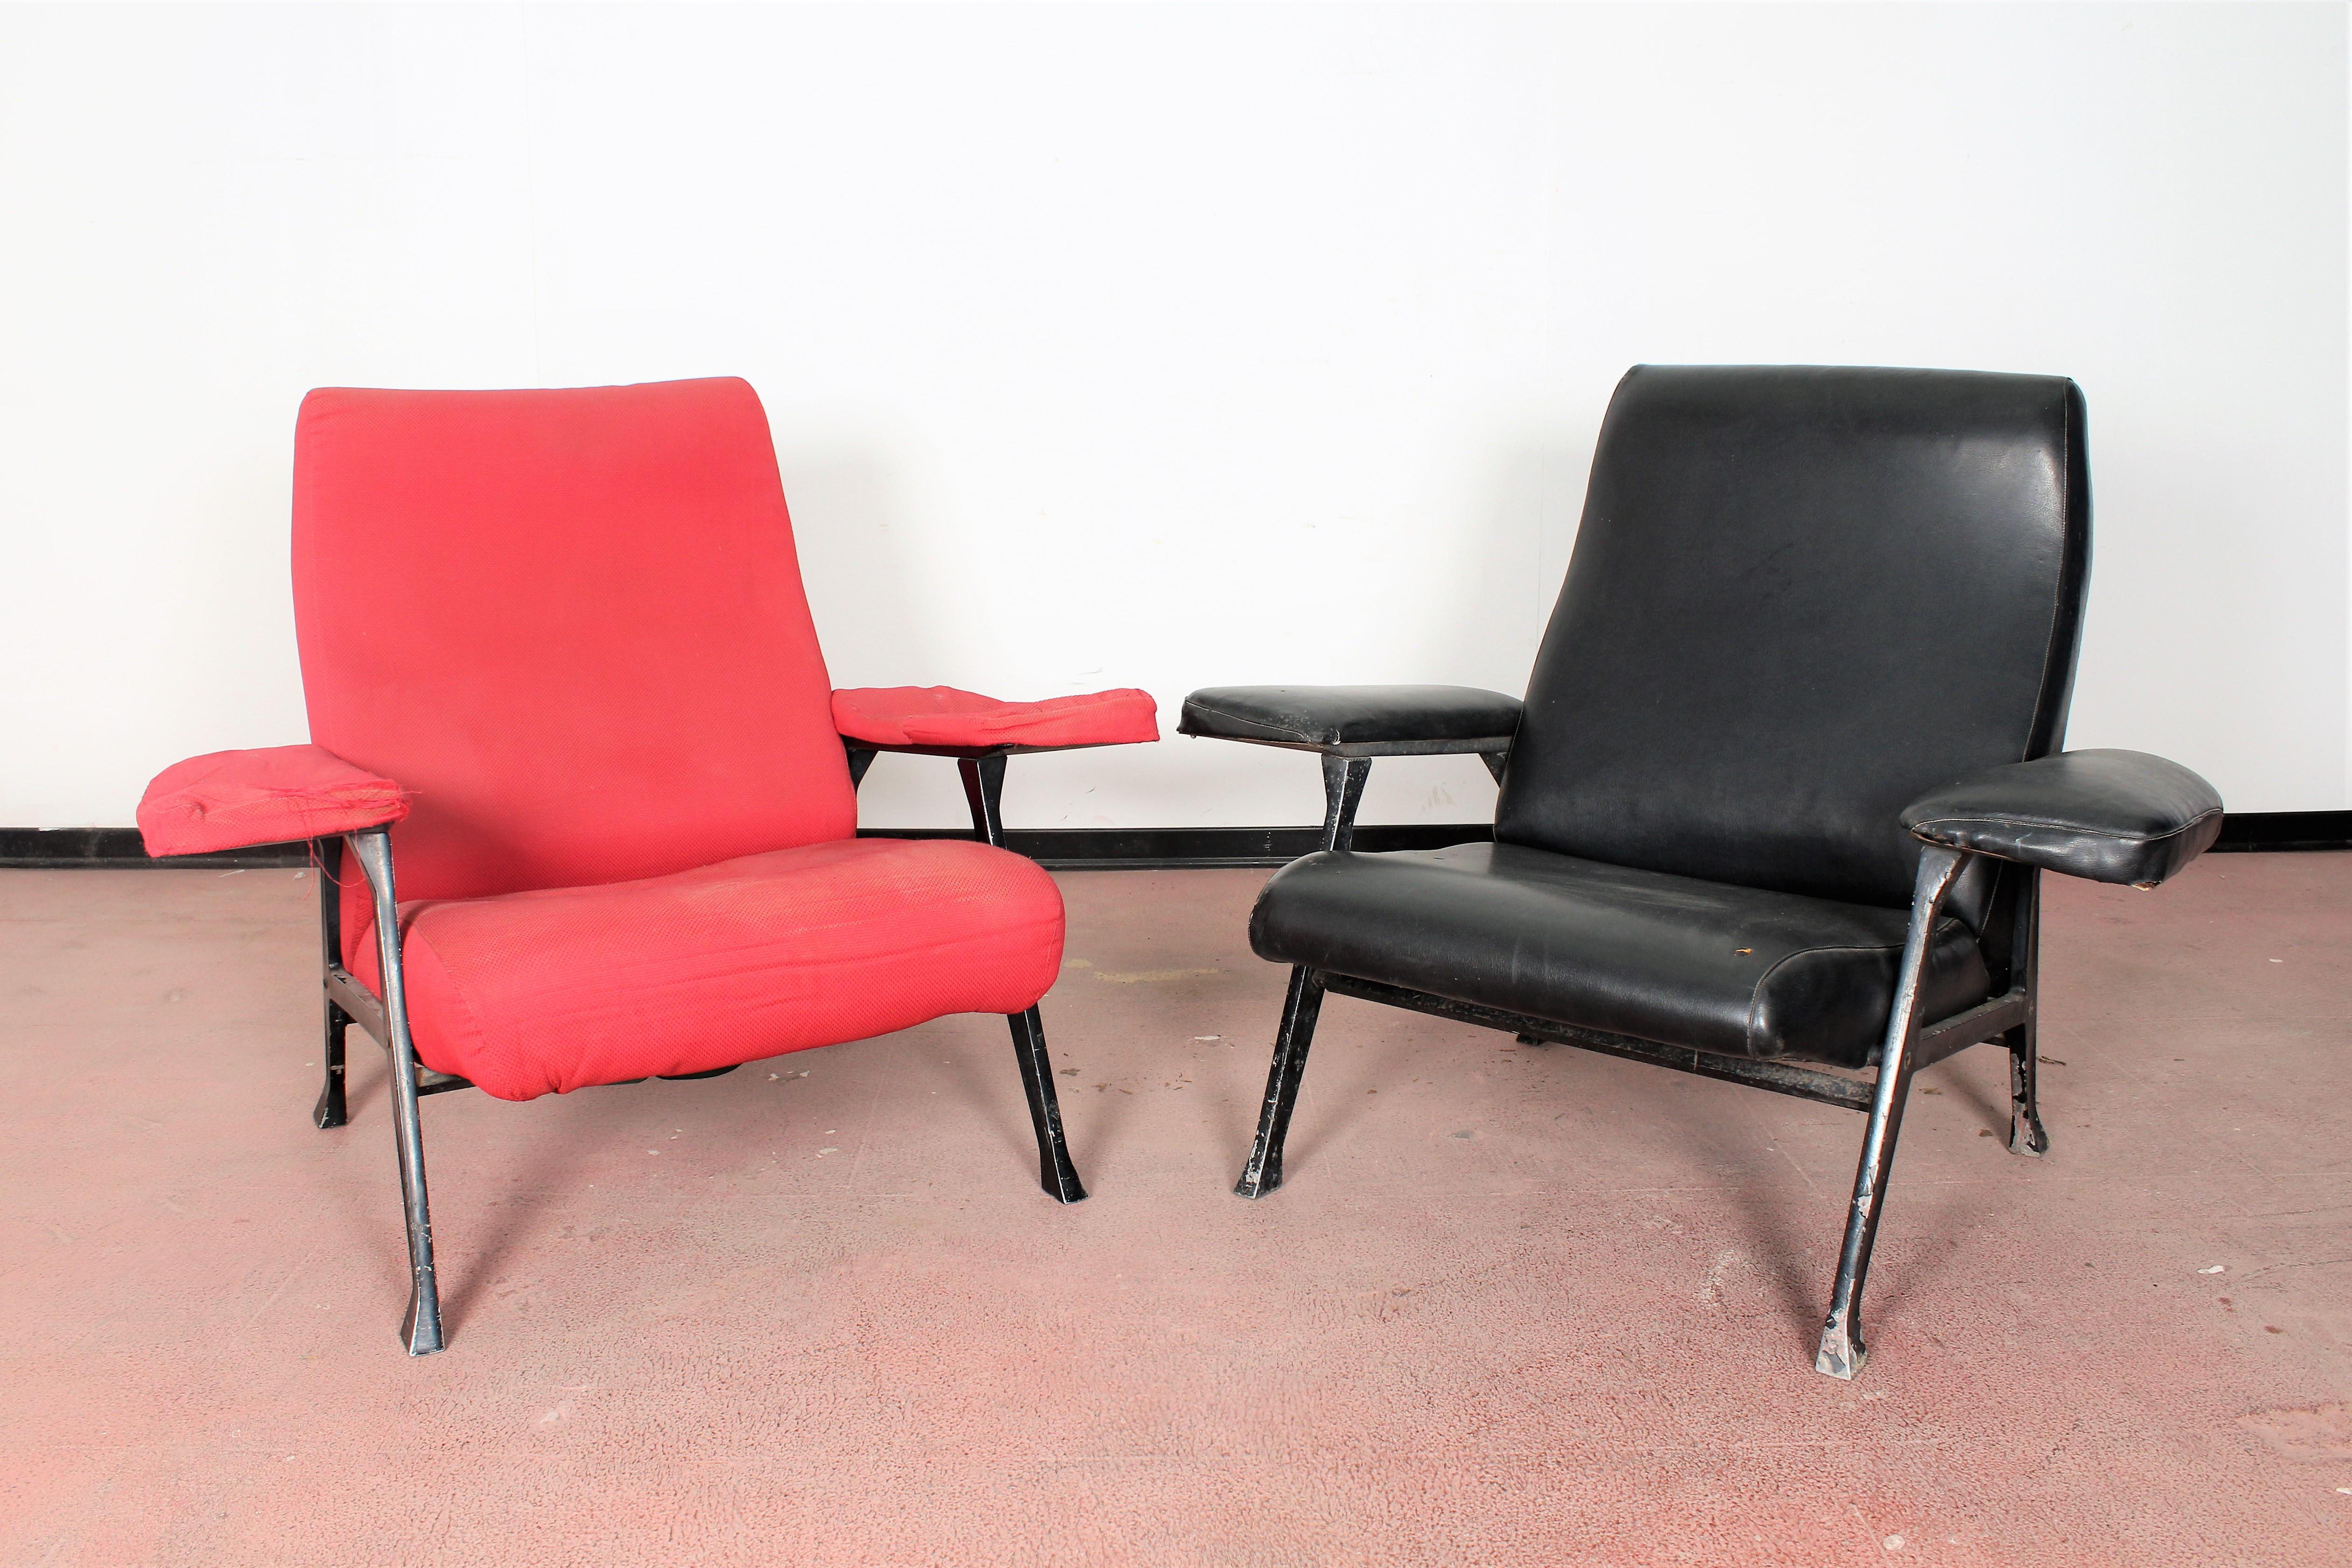 Italian R. Menghi by Arflex Midcentury Red Fabric and Black Skai Pair of Armchairs, 1958